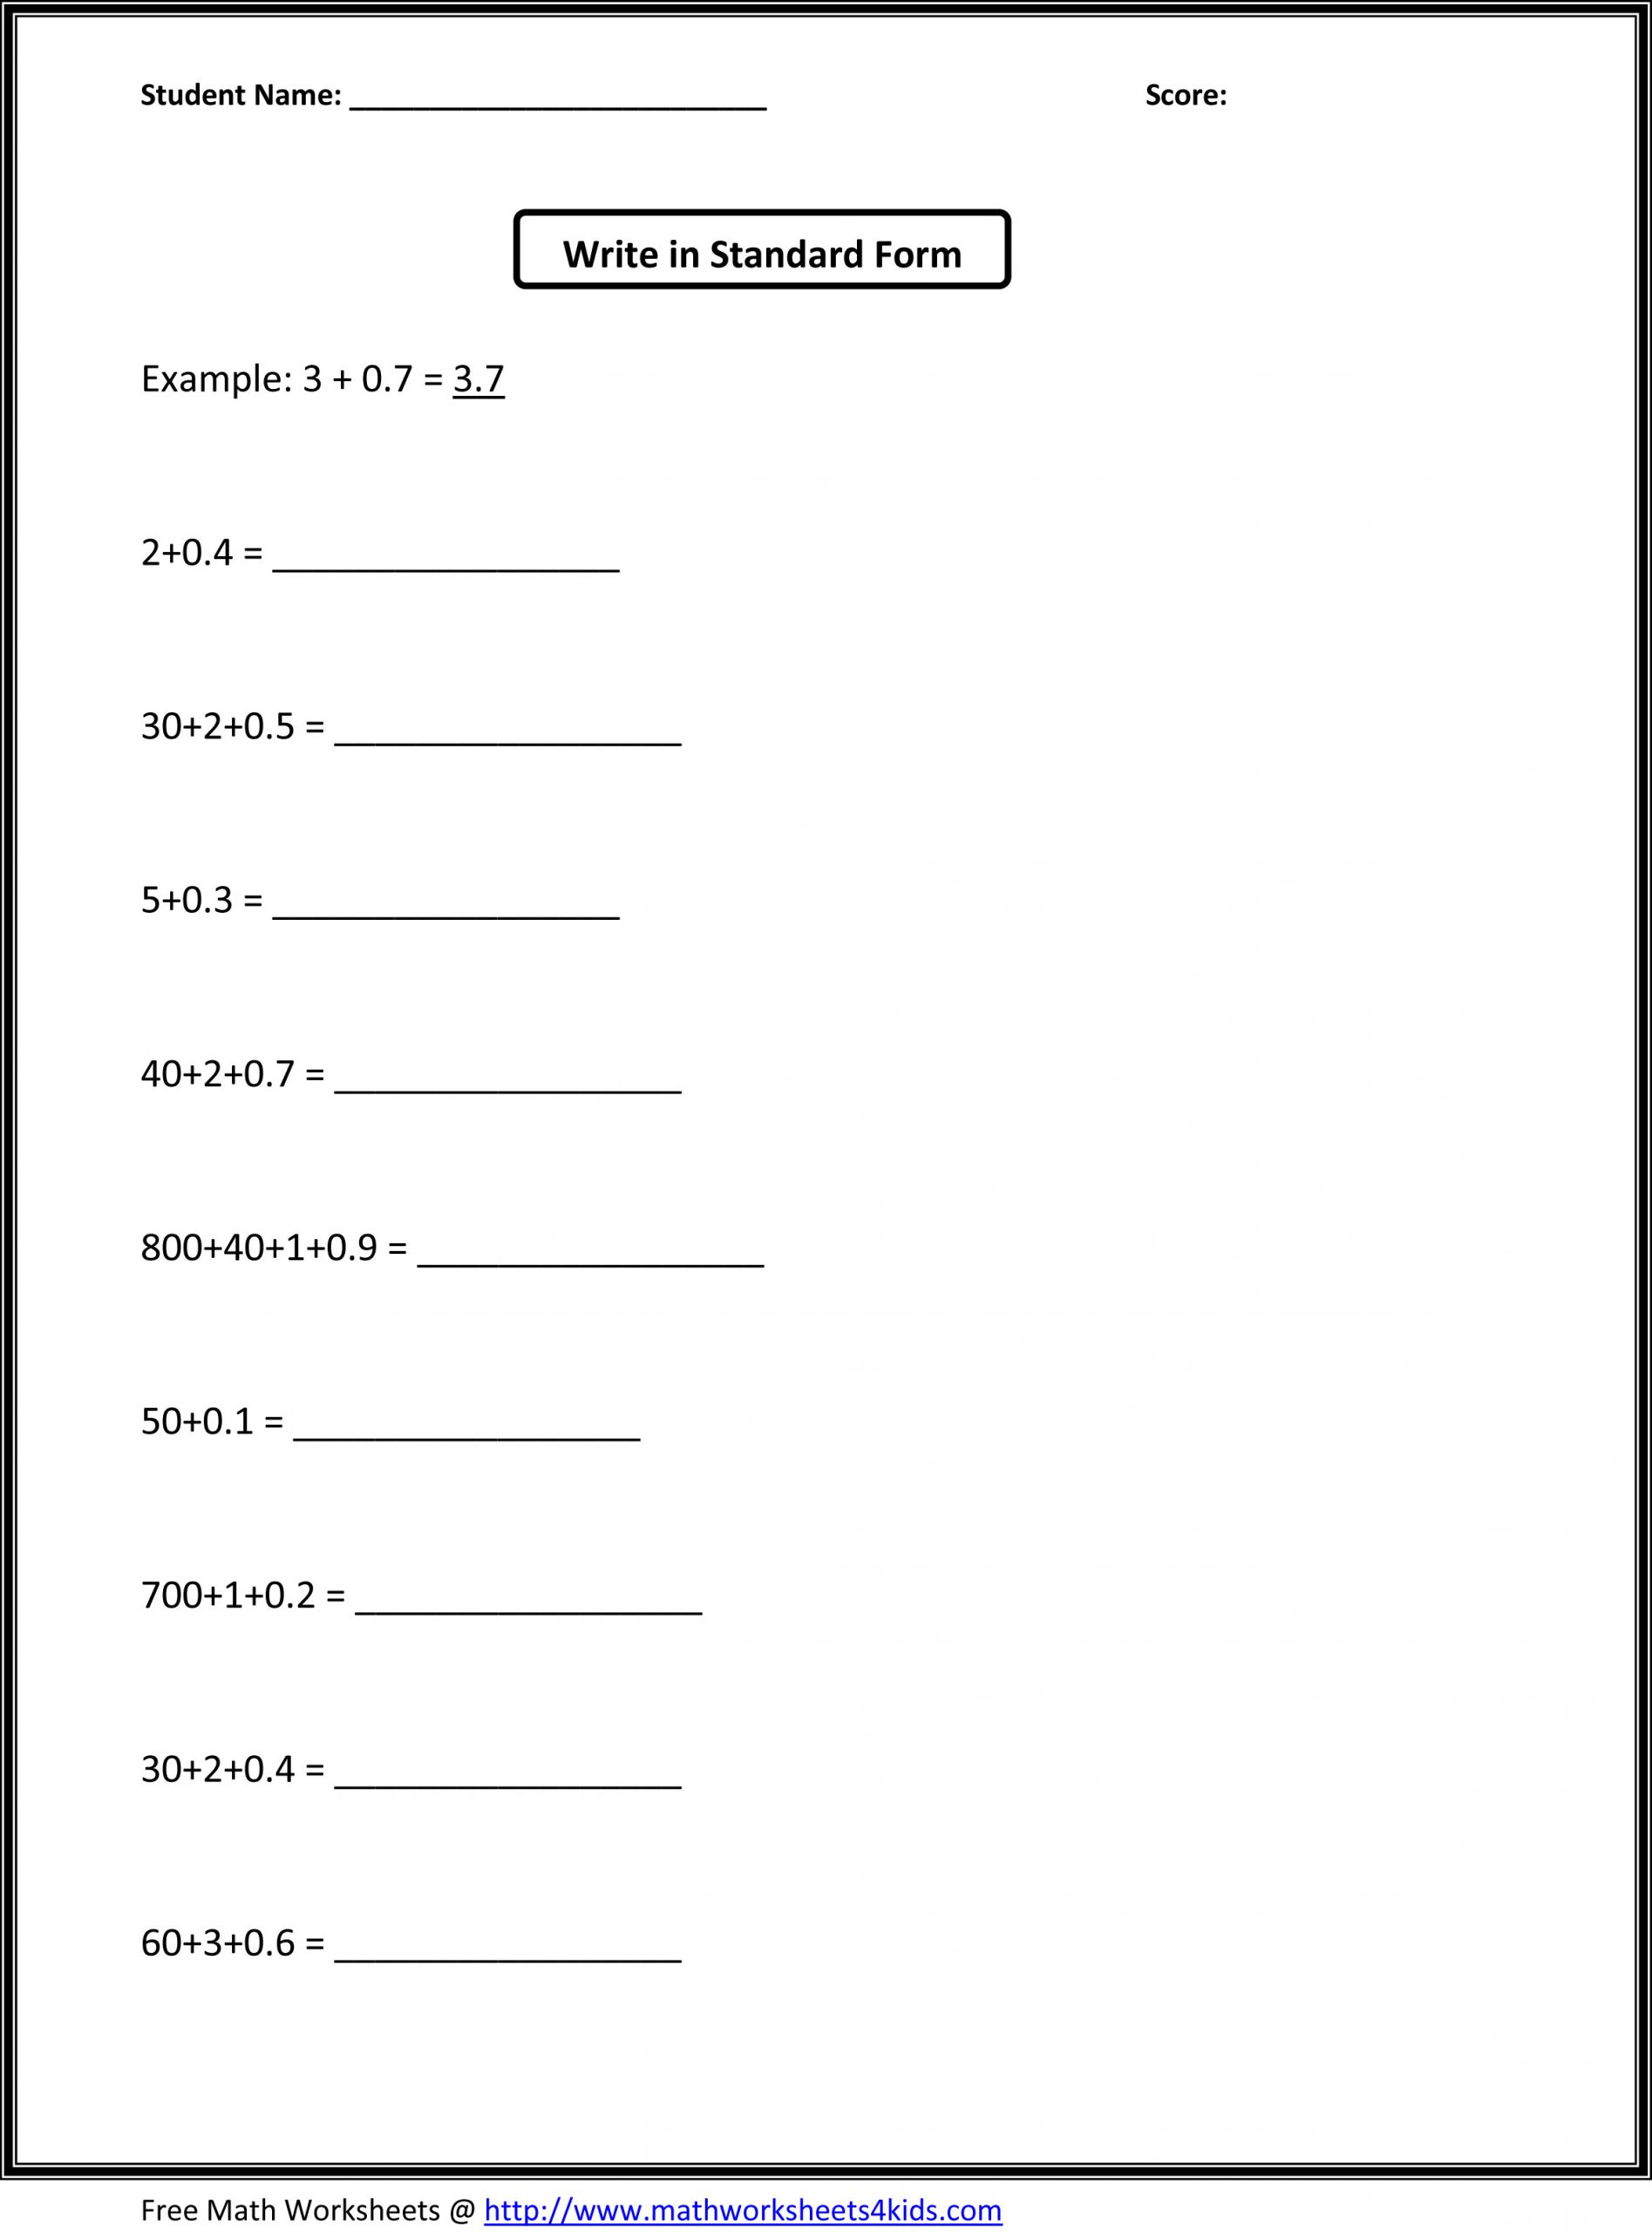 Free Math Worksheets Third Grade 3 Subtraction Subtract whole Thousands Missing Number